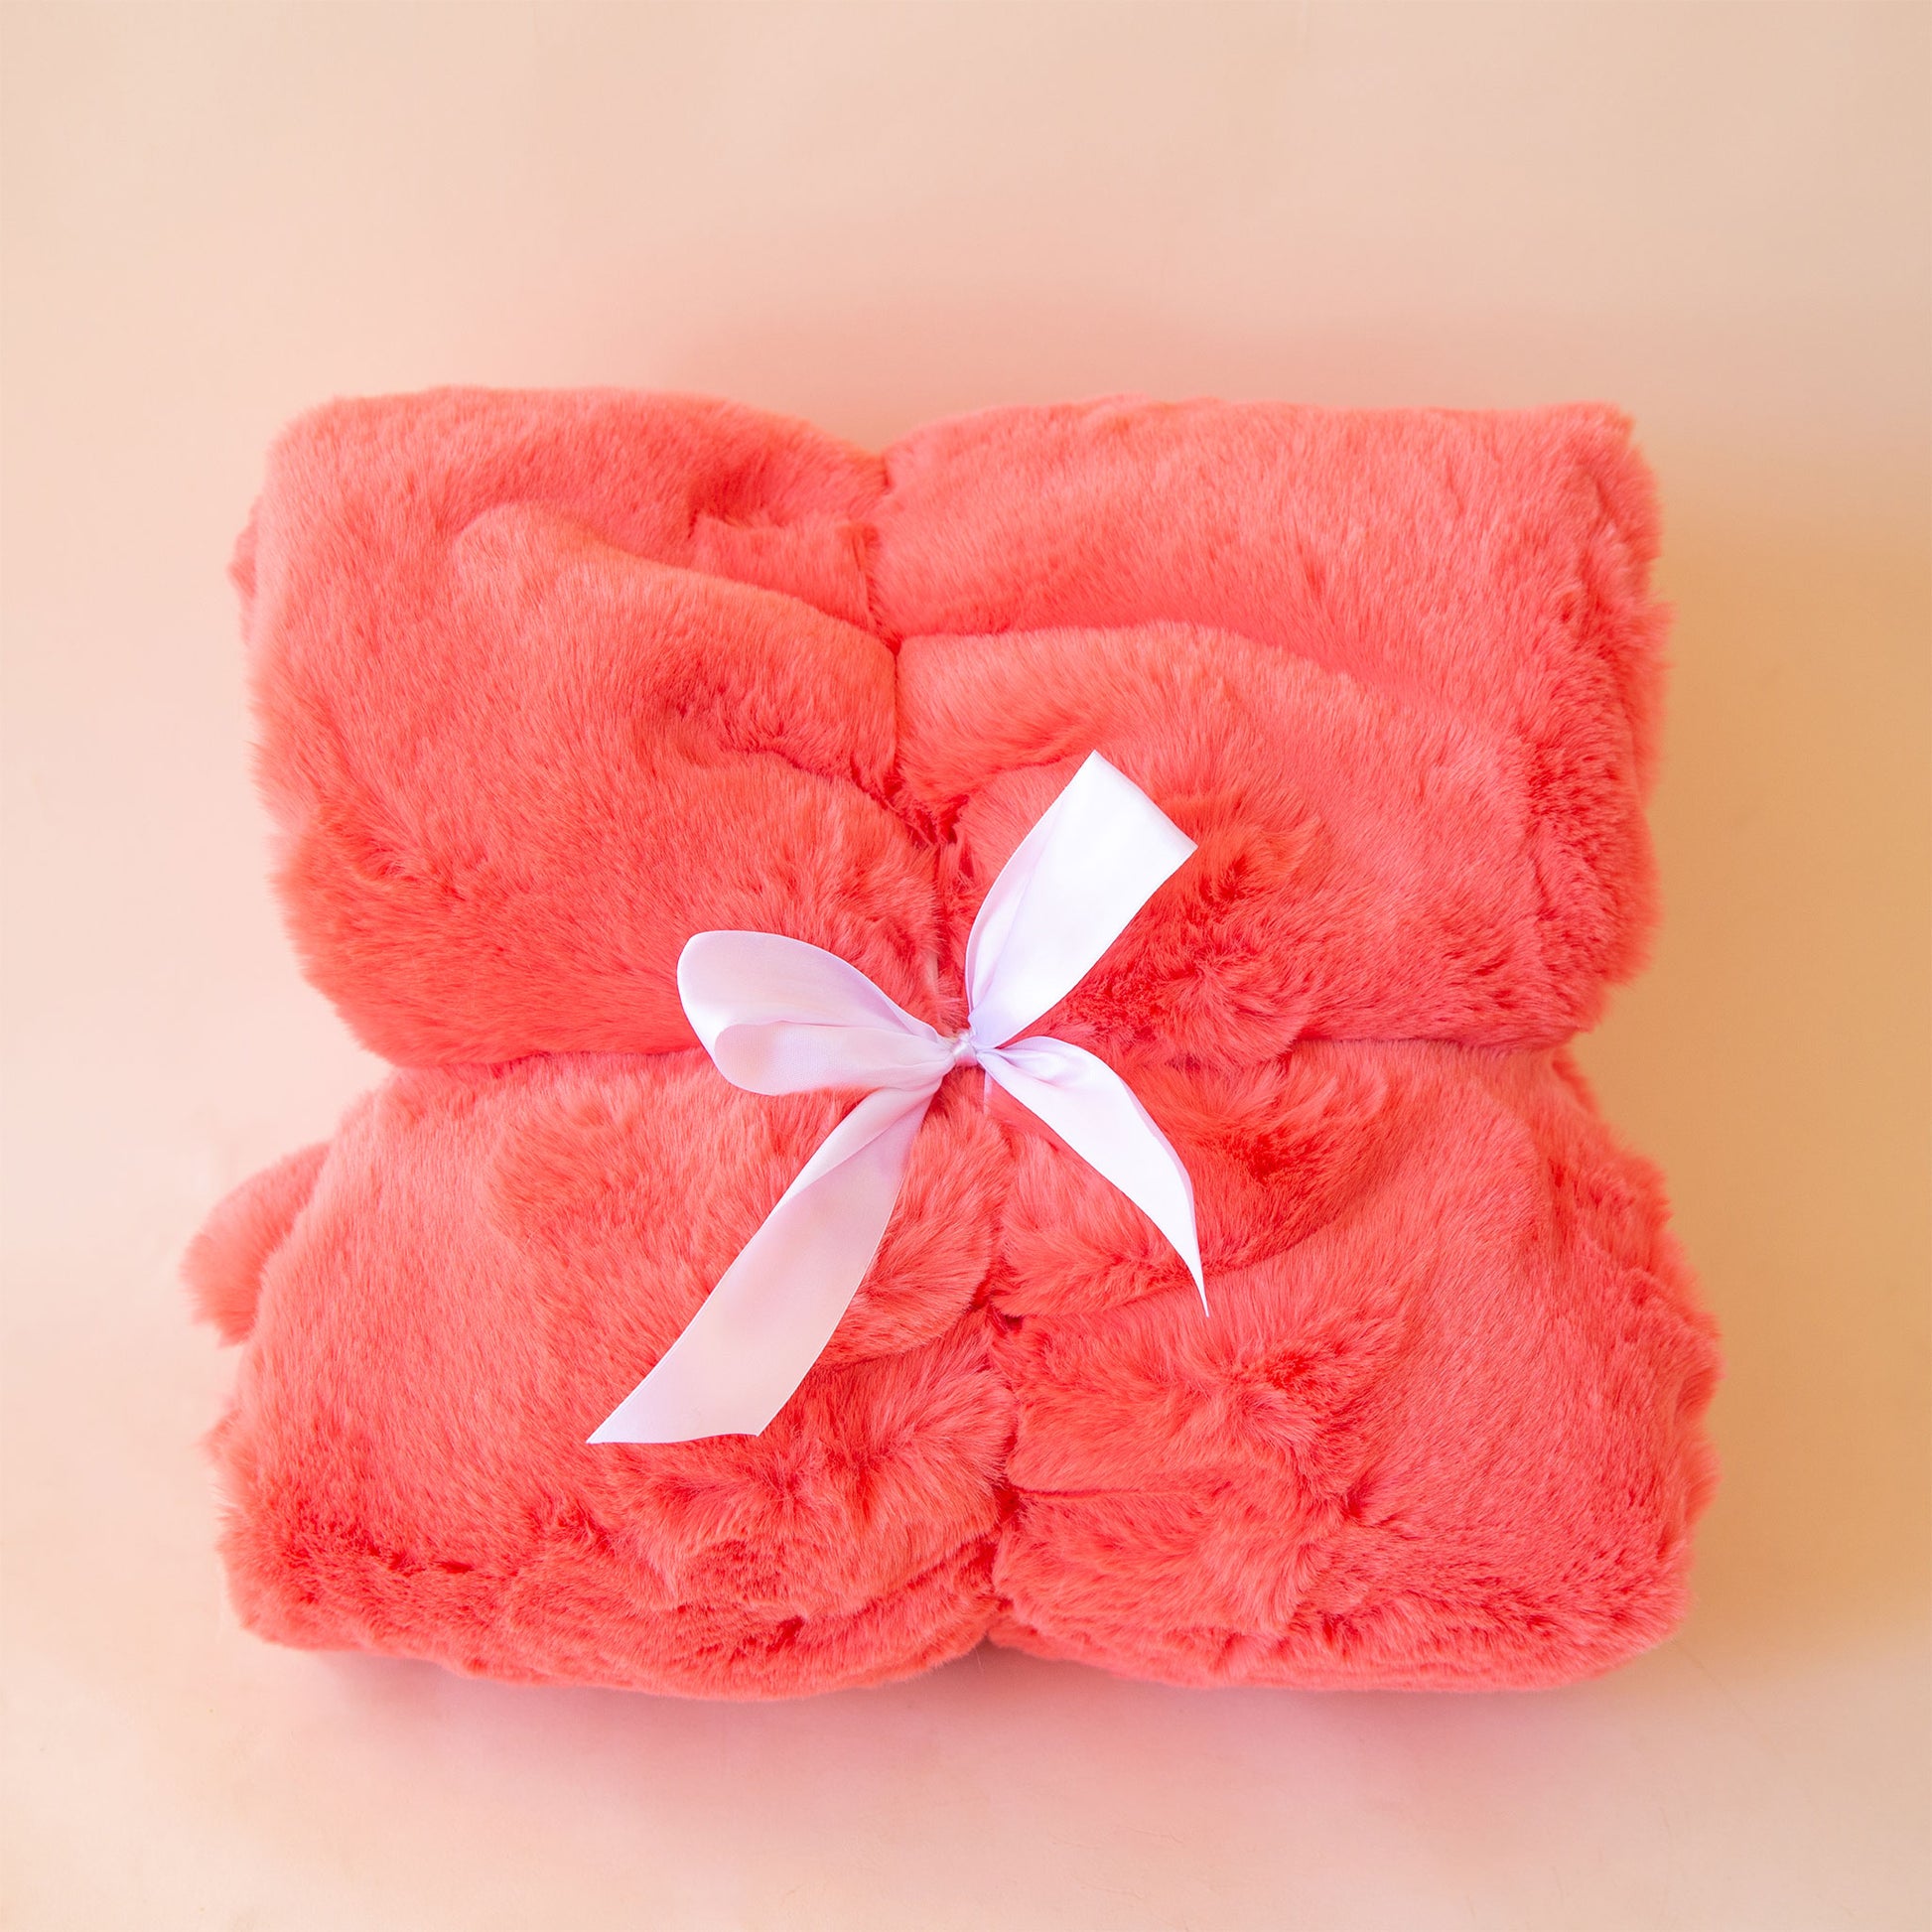 On a peach background is a faux fur reddish pink blanket folded and tied with a white satin ribbon.